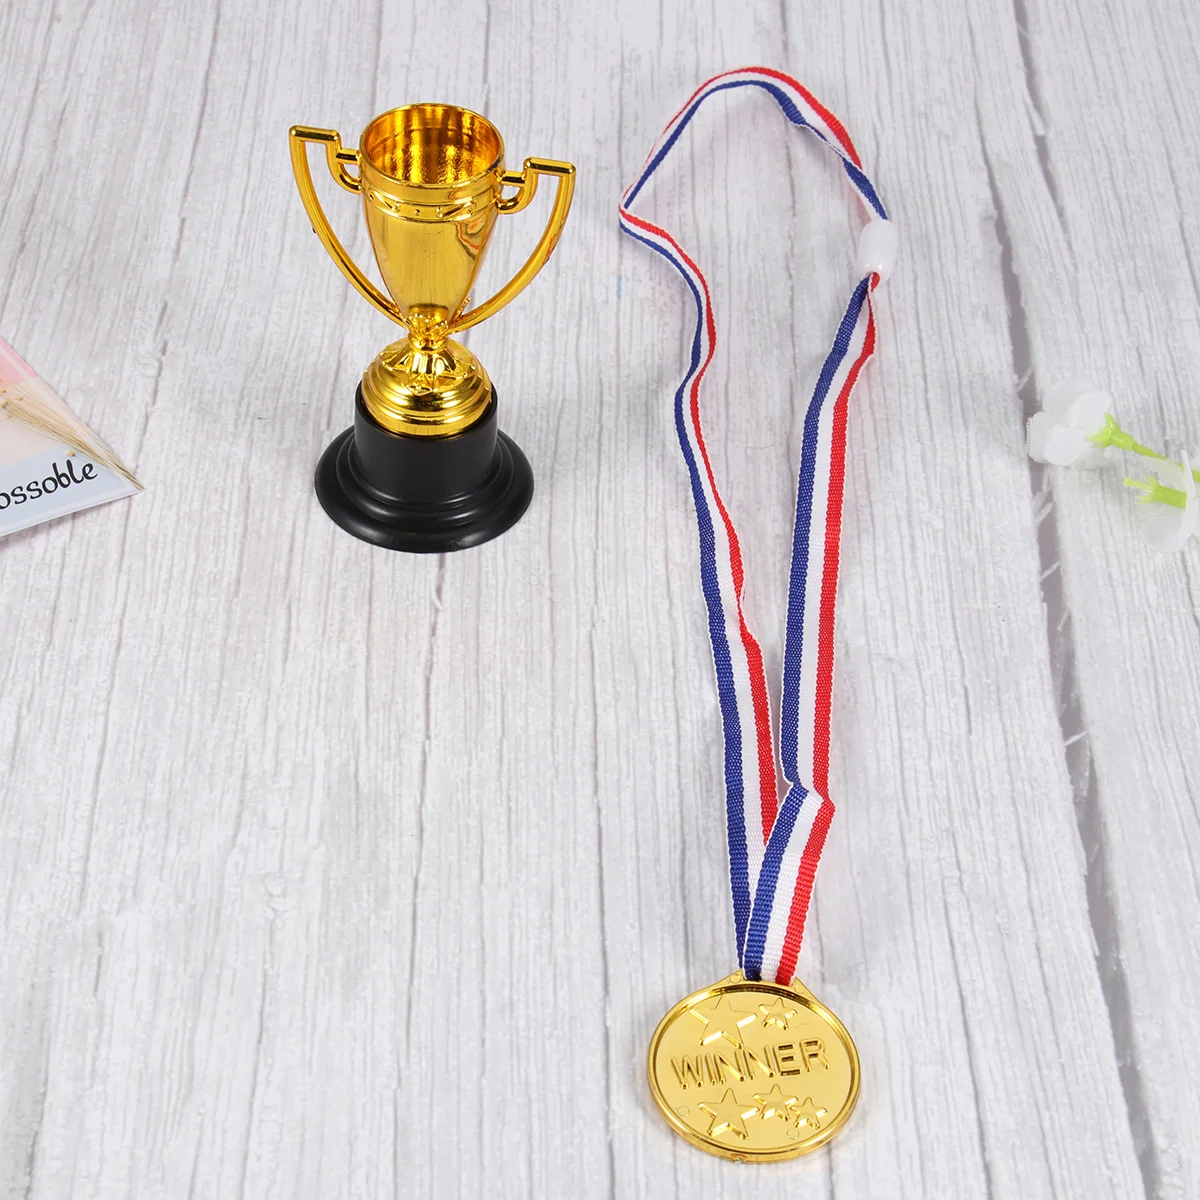 

Award Trophy Cups Medals Kids Reward Prizes Gift for Birthday Shower School Party Toys Bag Favor ( 8xTrophies+ 8xMedals )